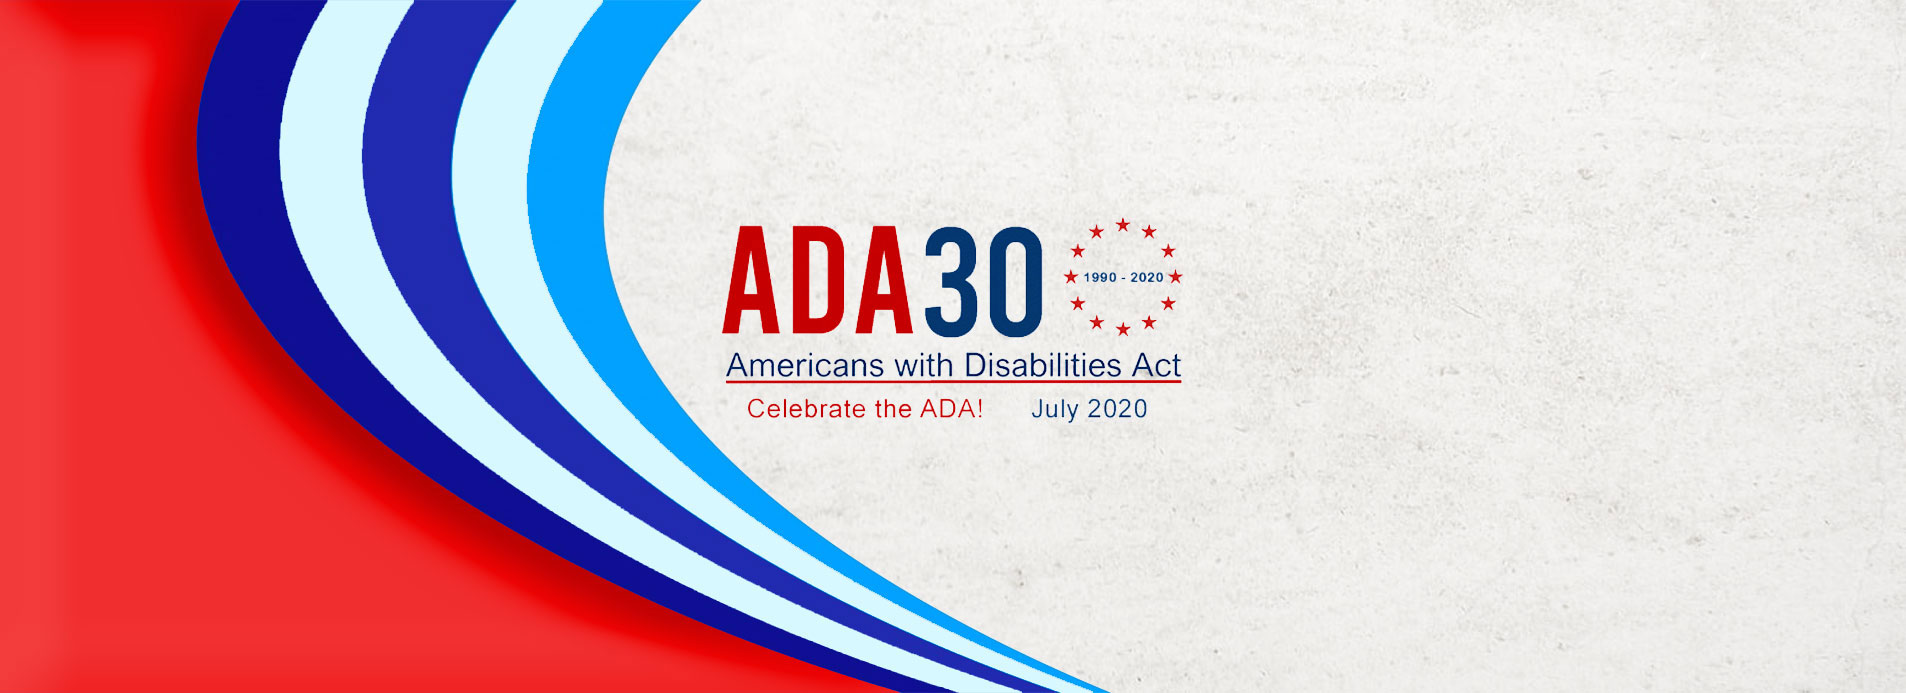 Americans with Disabilities Act 30th Anniversary Celebration